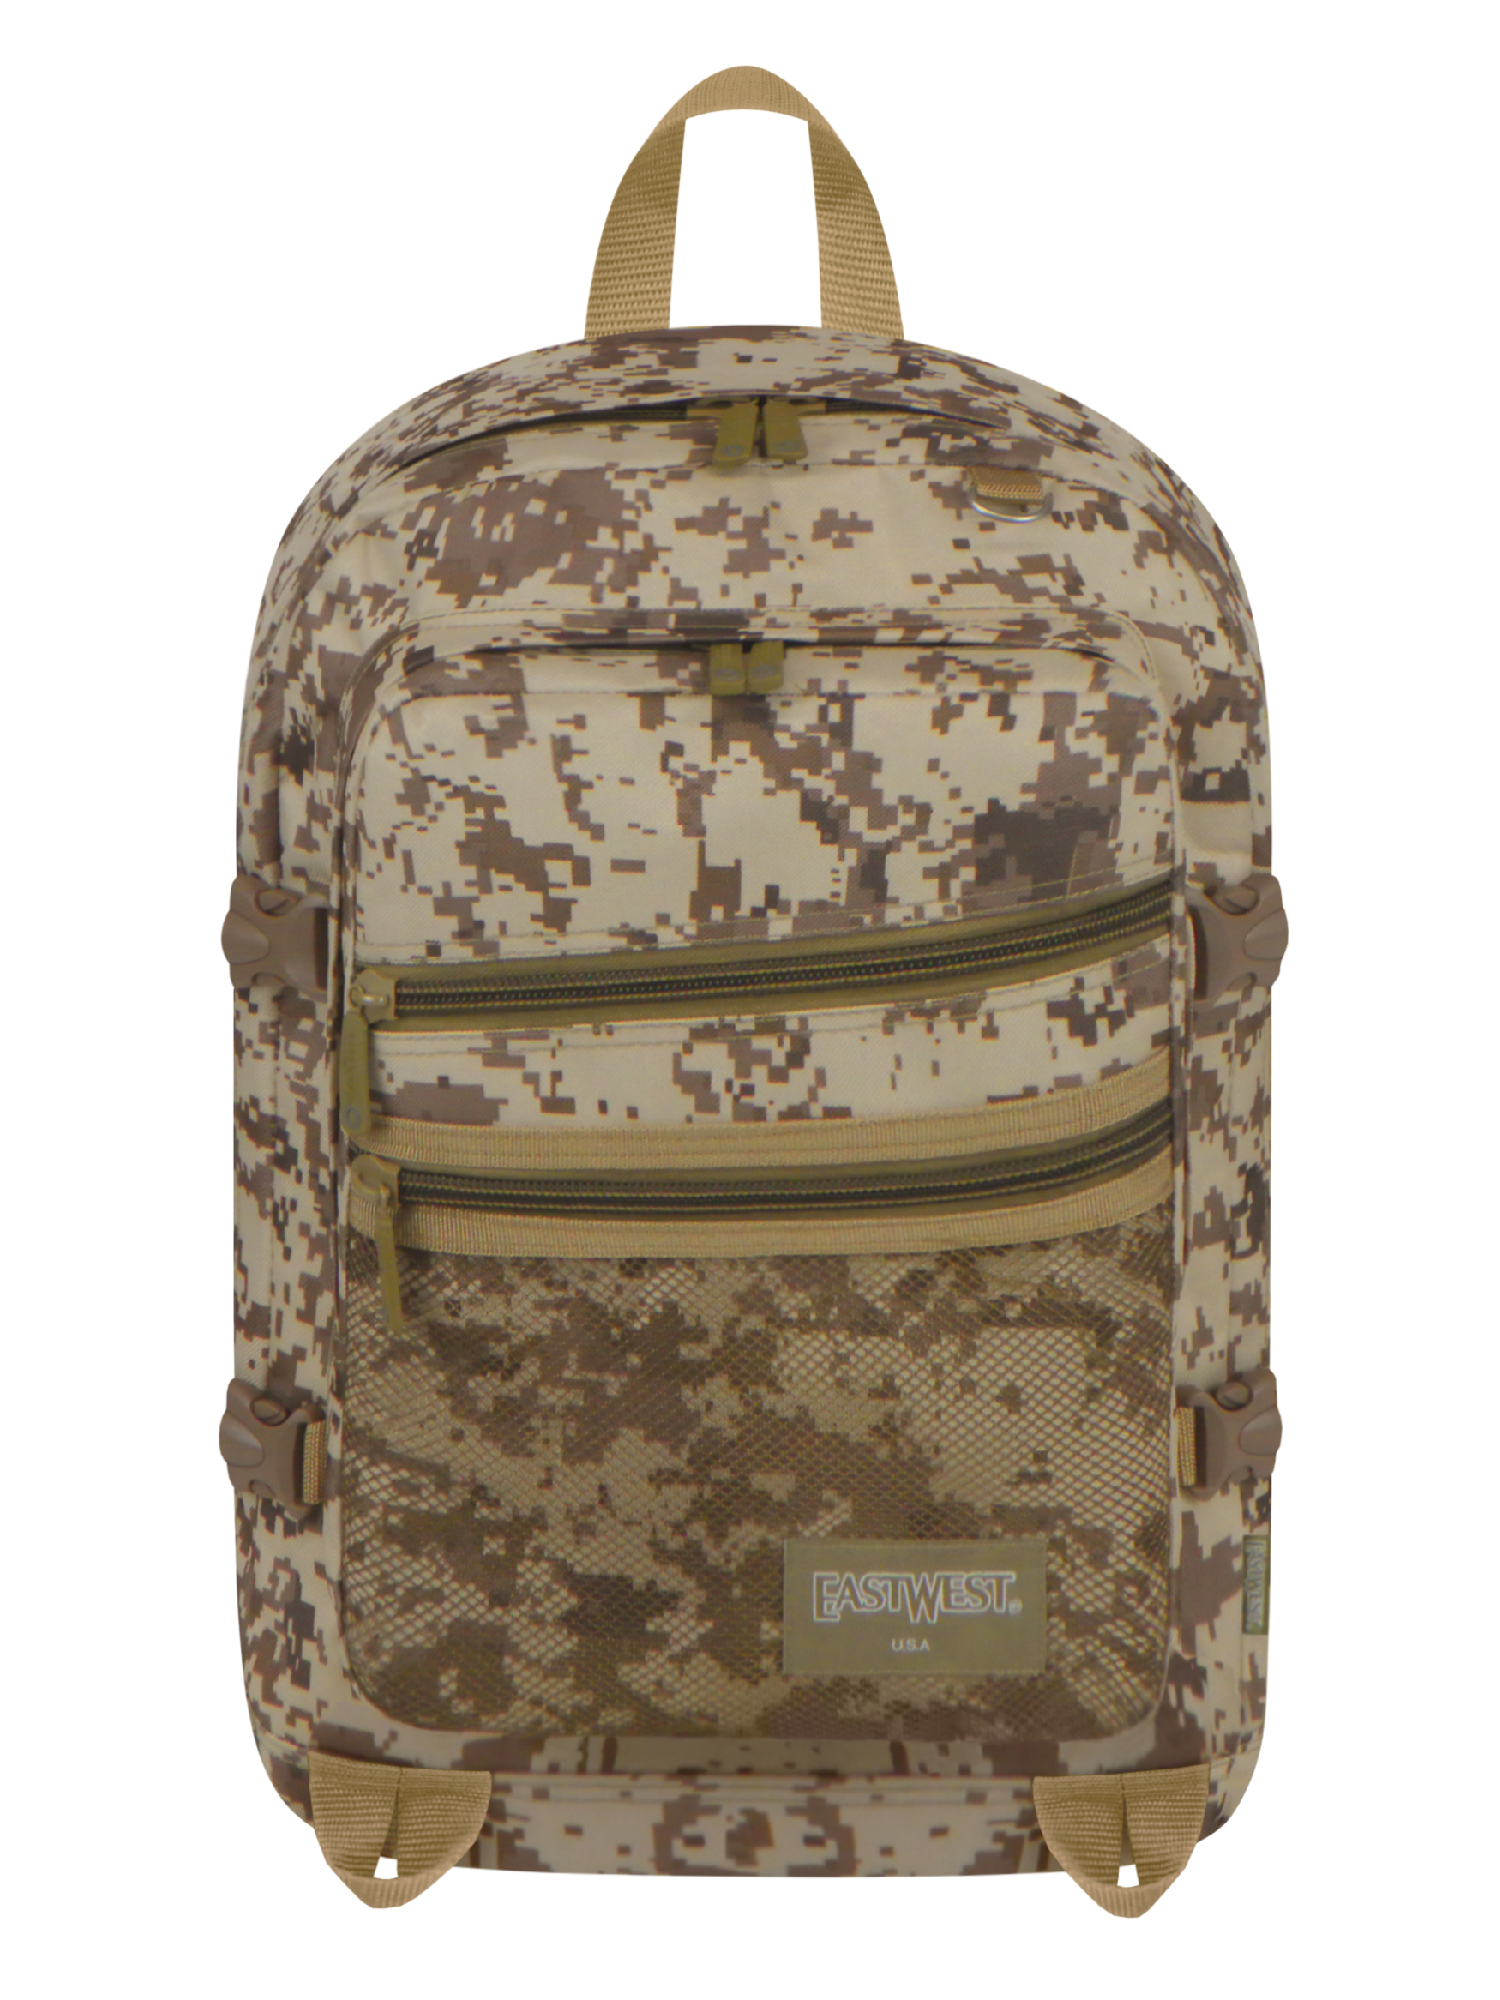 Commuter Camo Backpack - Tan ACU - image 1 of 3